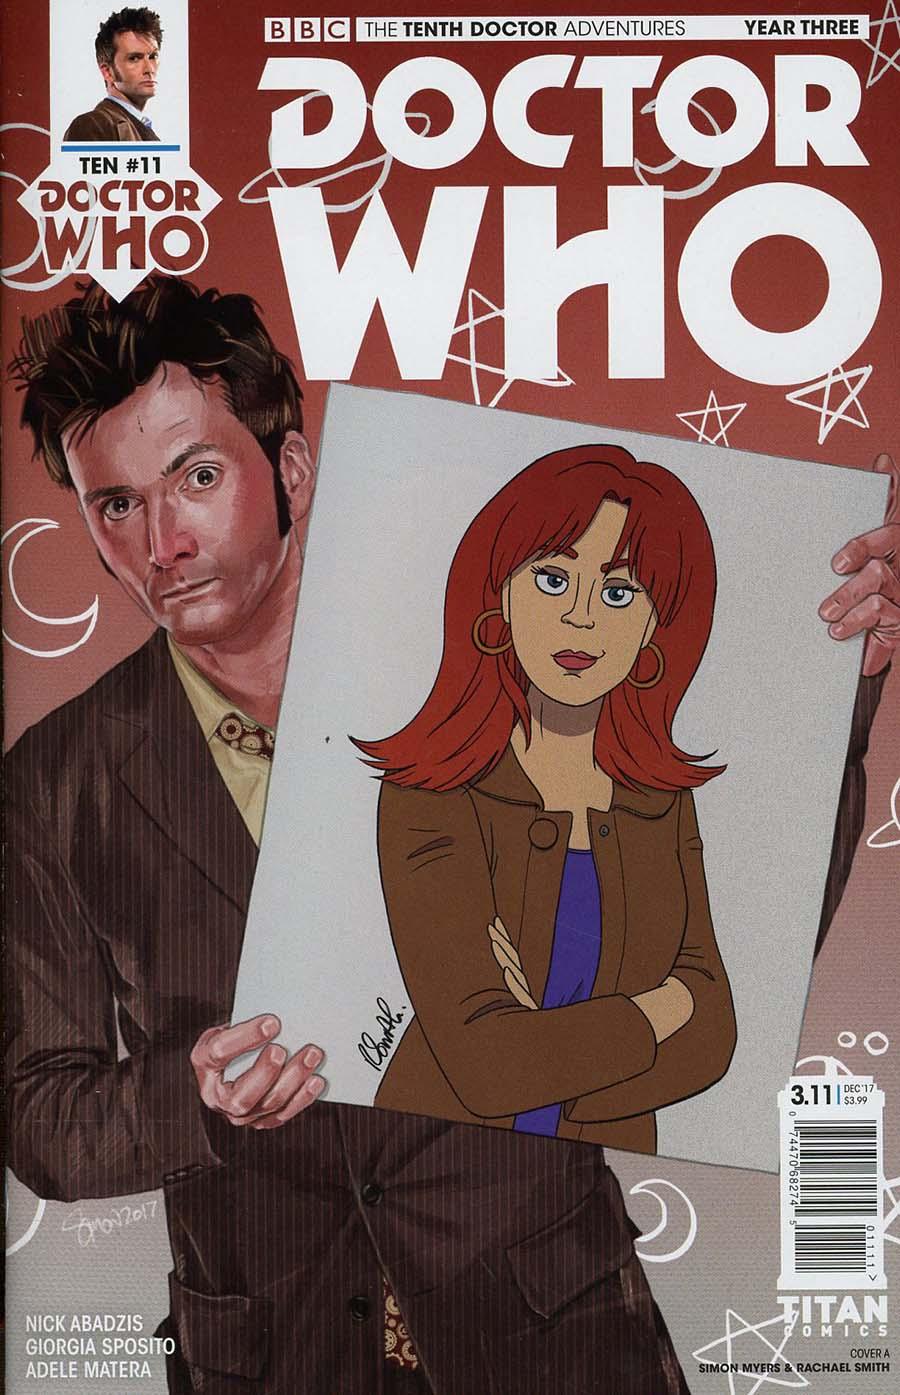 Doctor Who 10th Doctor Year Three Vol. 1 #11